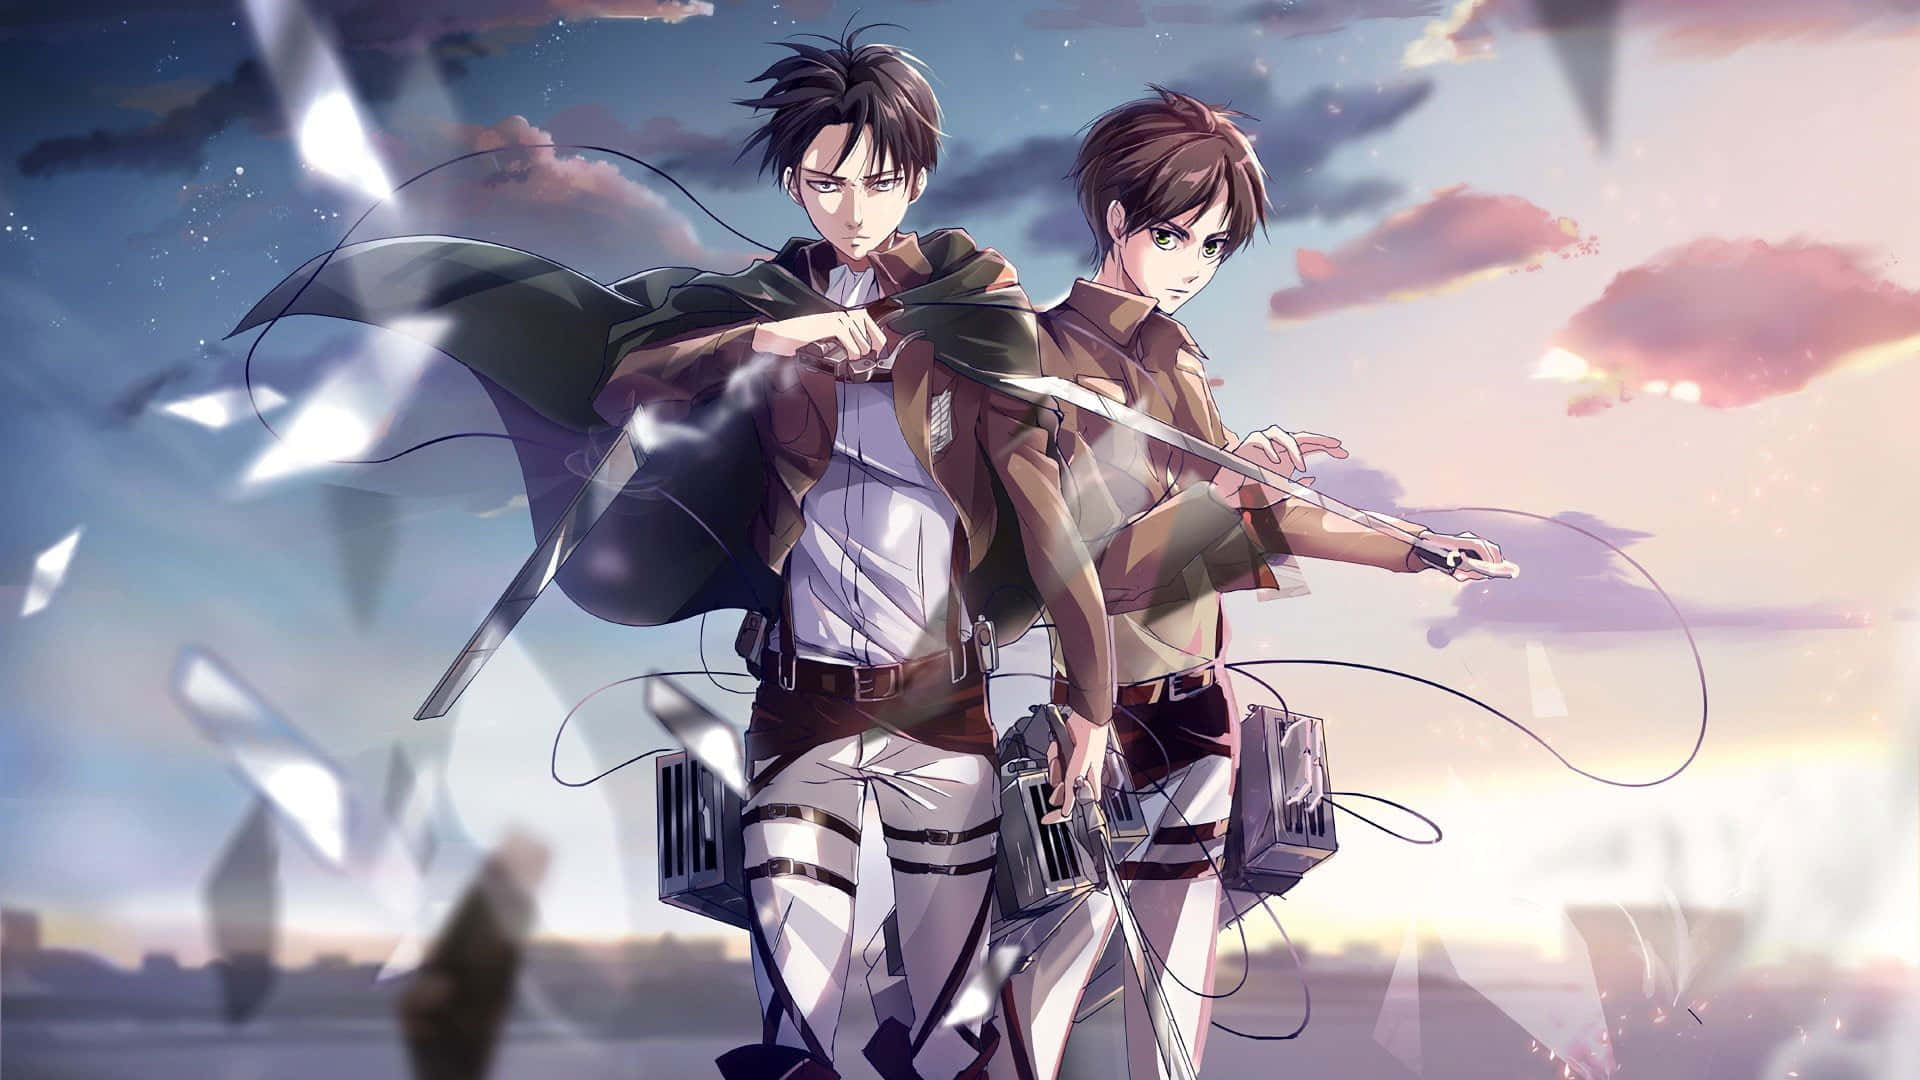 "Fight for freedom with Titan Eren" Wallpaper